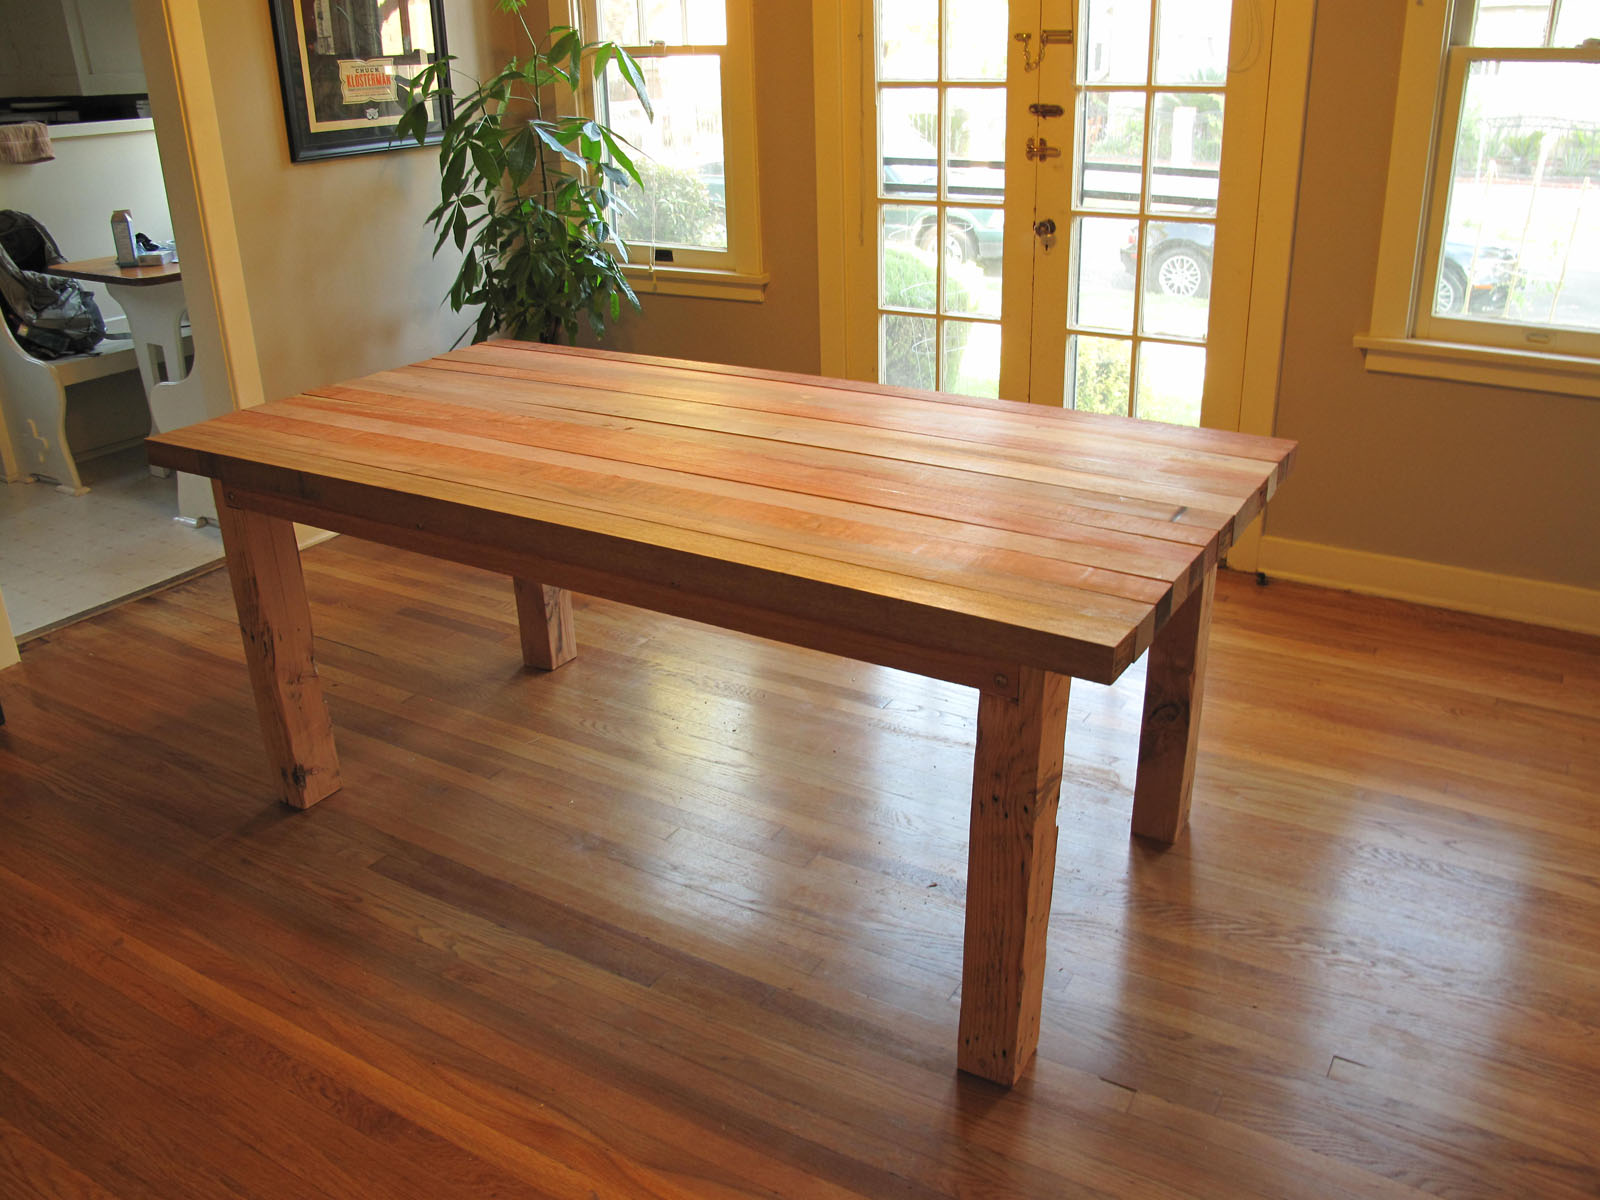 DIY: Reclaimed Wood Dining Table A Family Record